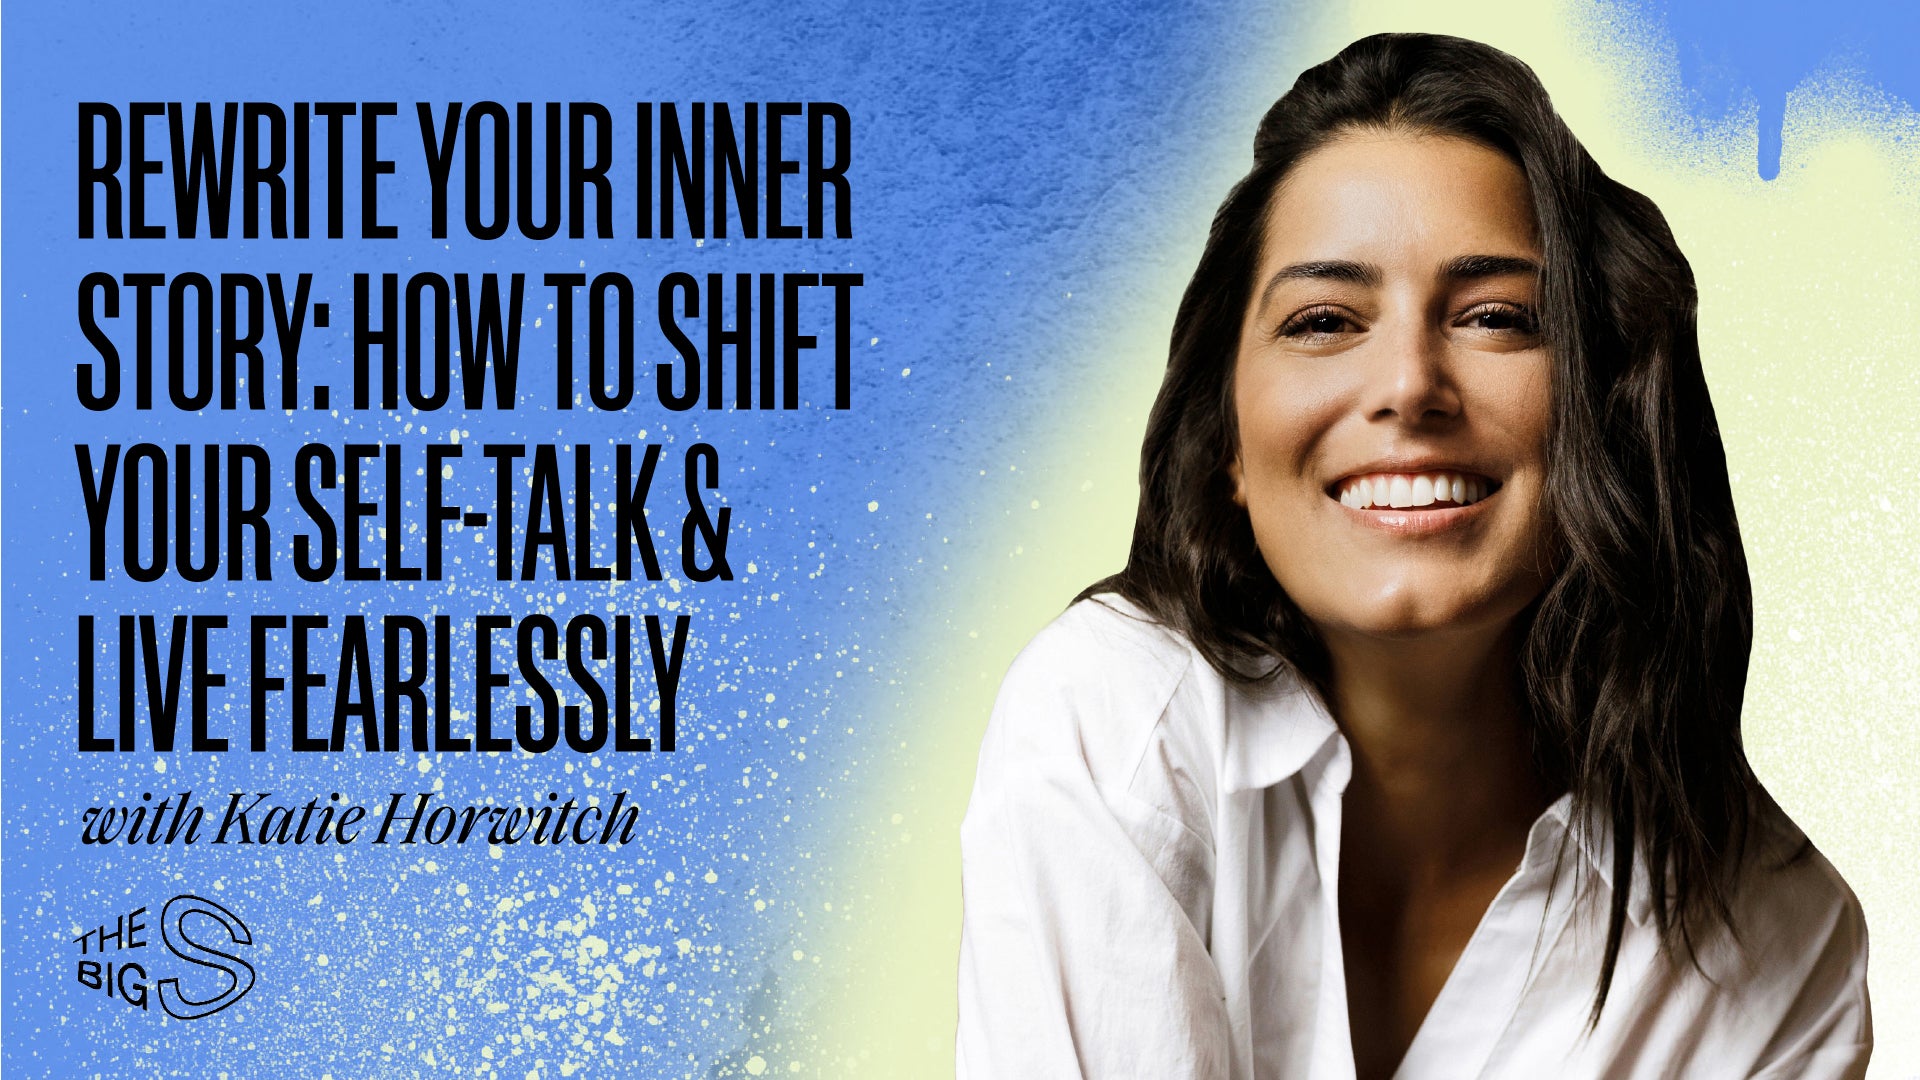 76. Rewrite Your Inner Story: How To Shift Your Self-Talk & Live Fearlessly with Katie Horwitch